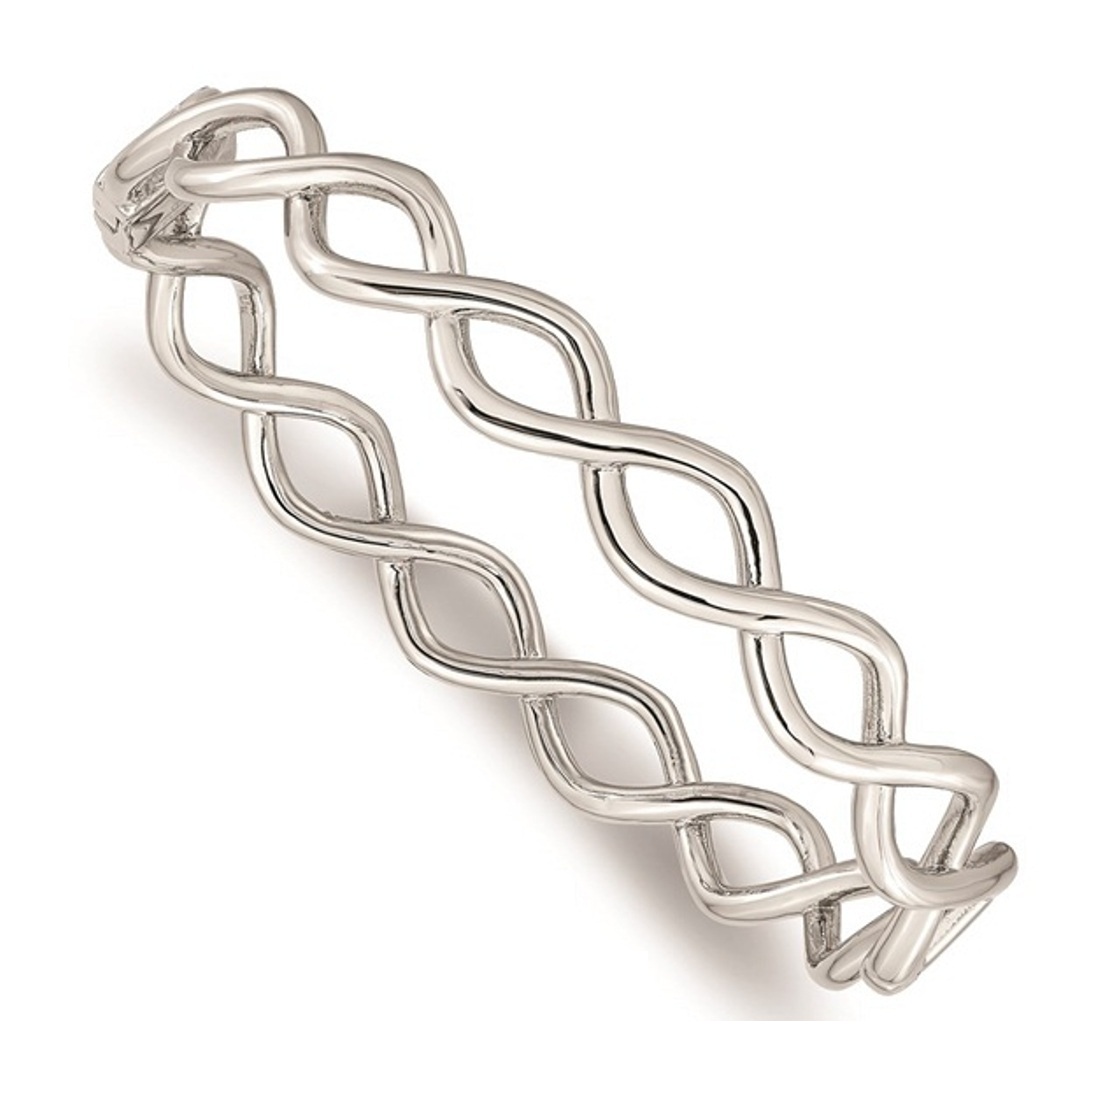 Stainless Steel Polished Criss Cross Hinged Bangle